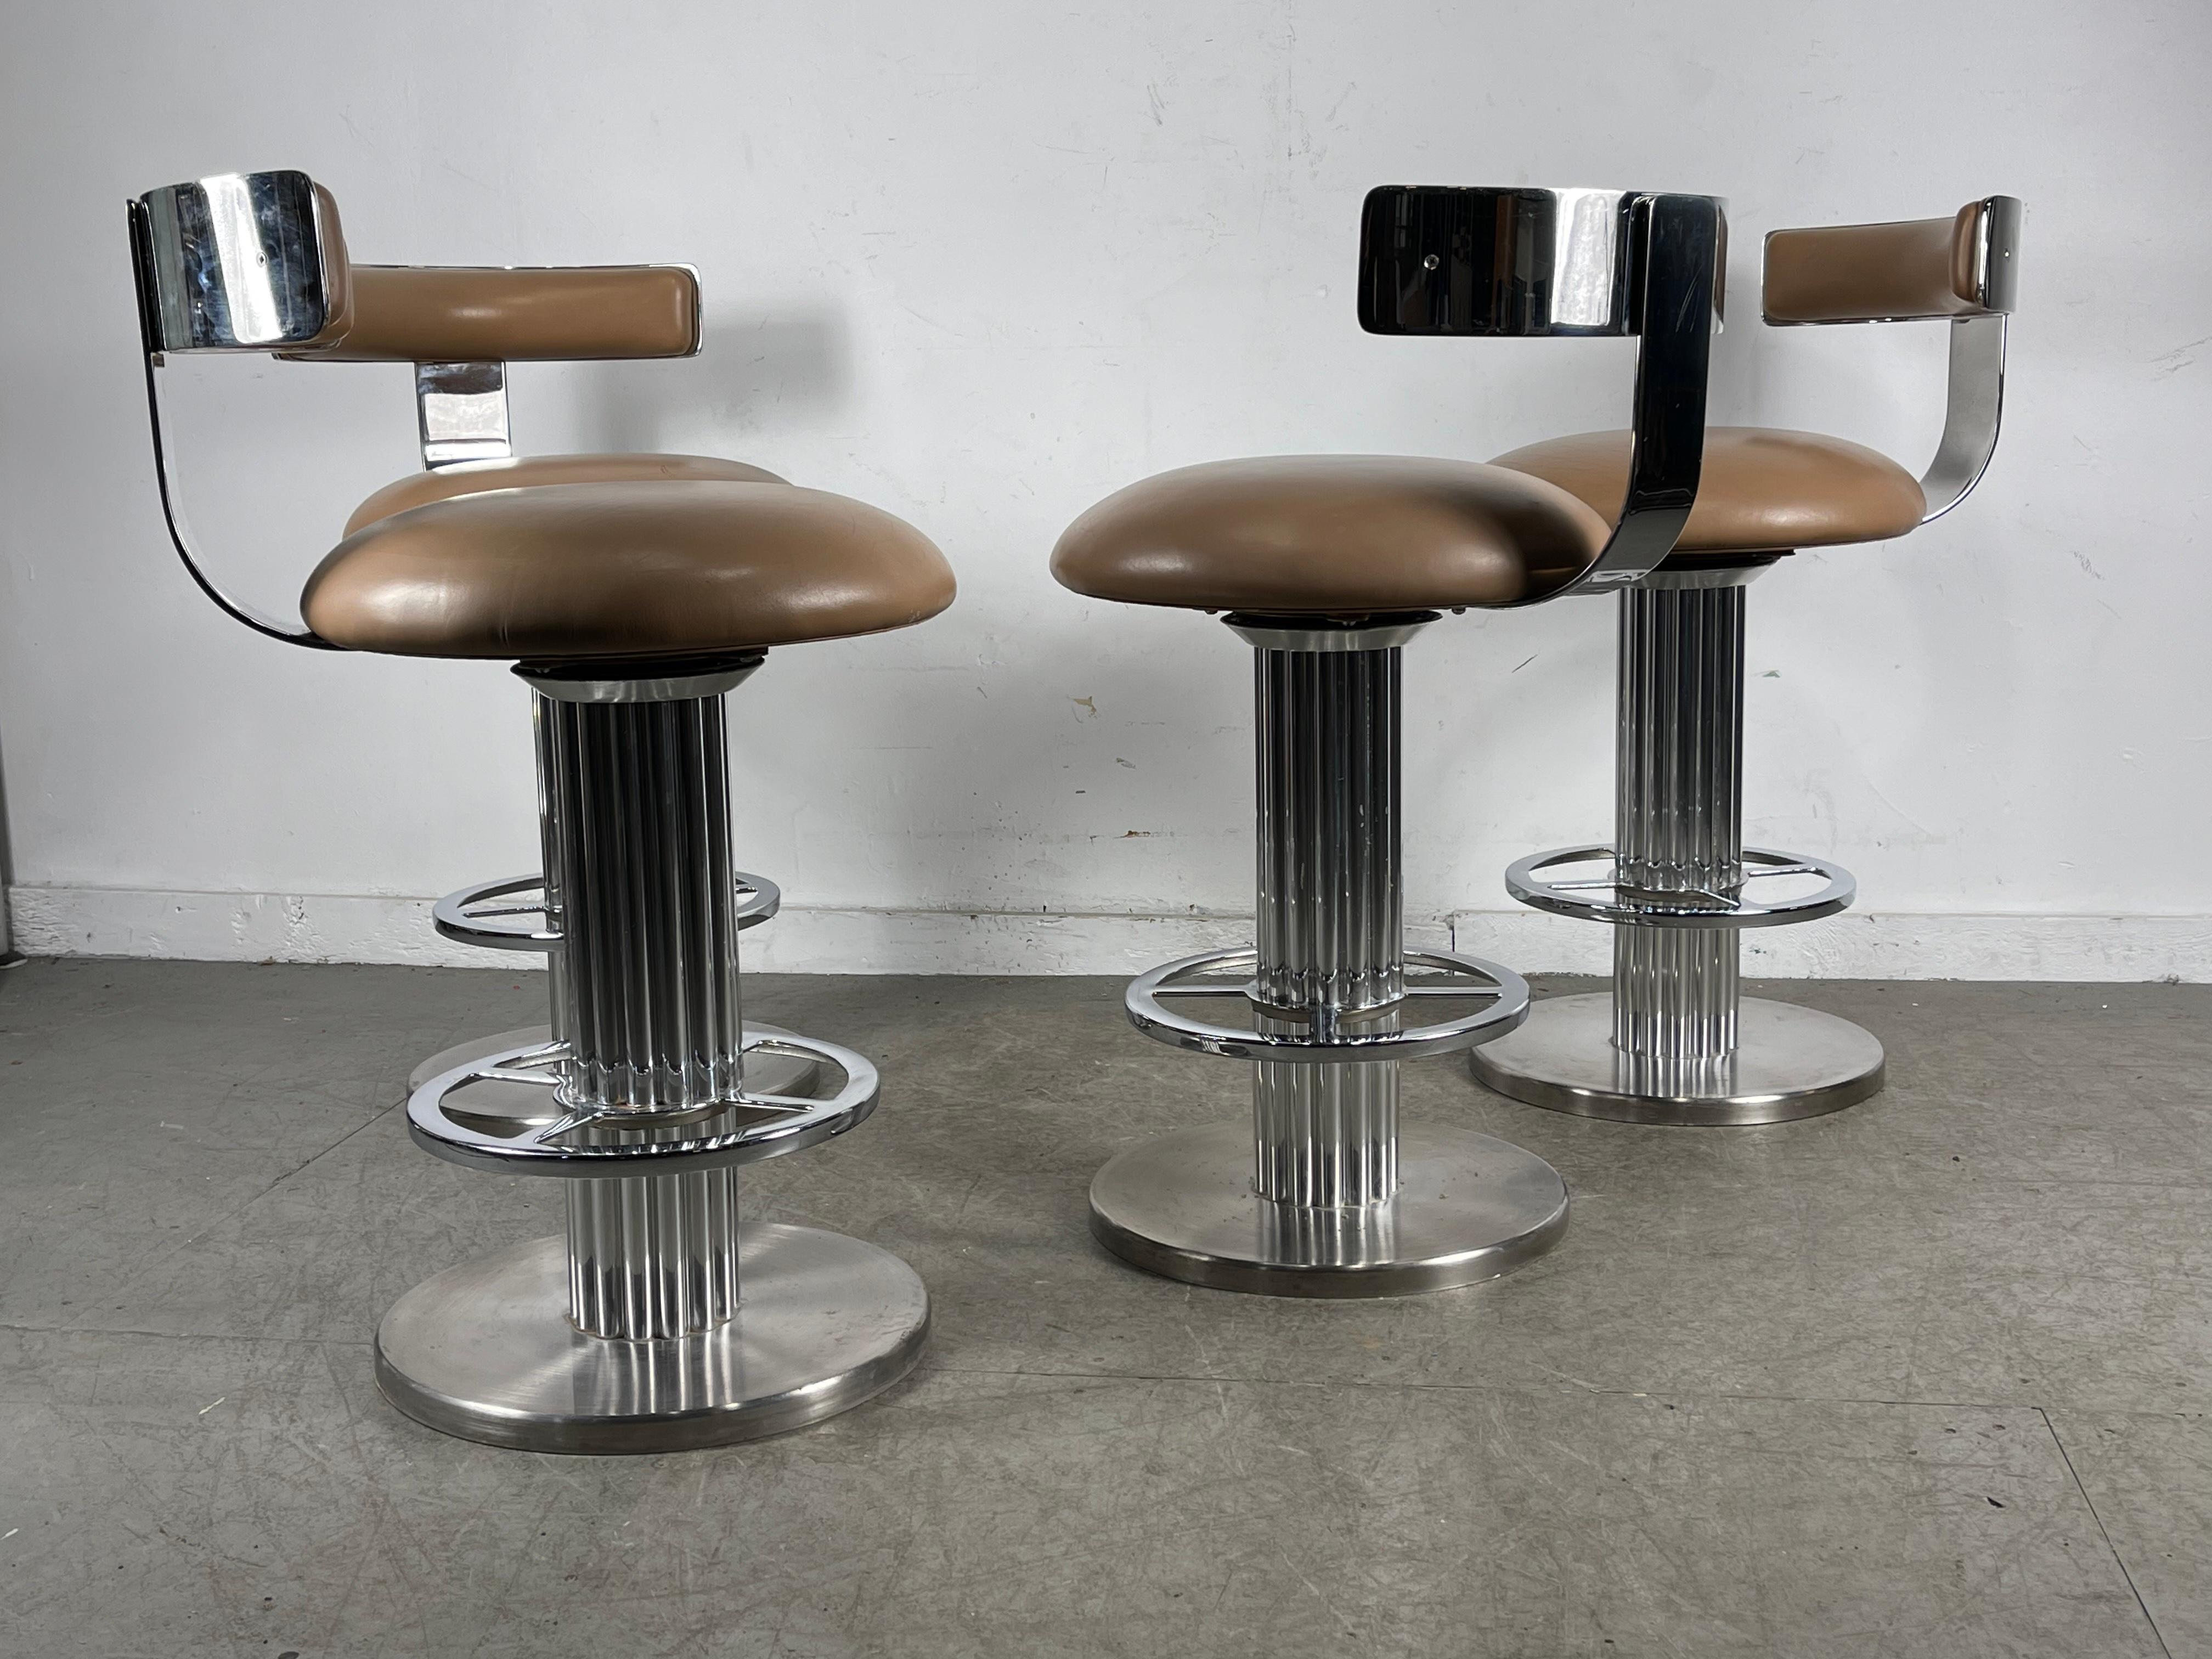 American Design for Leisure Swivel Barstools, Art Deco Revival, Nickel, Stainless, 4 Avail.